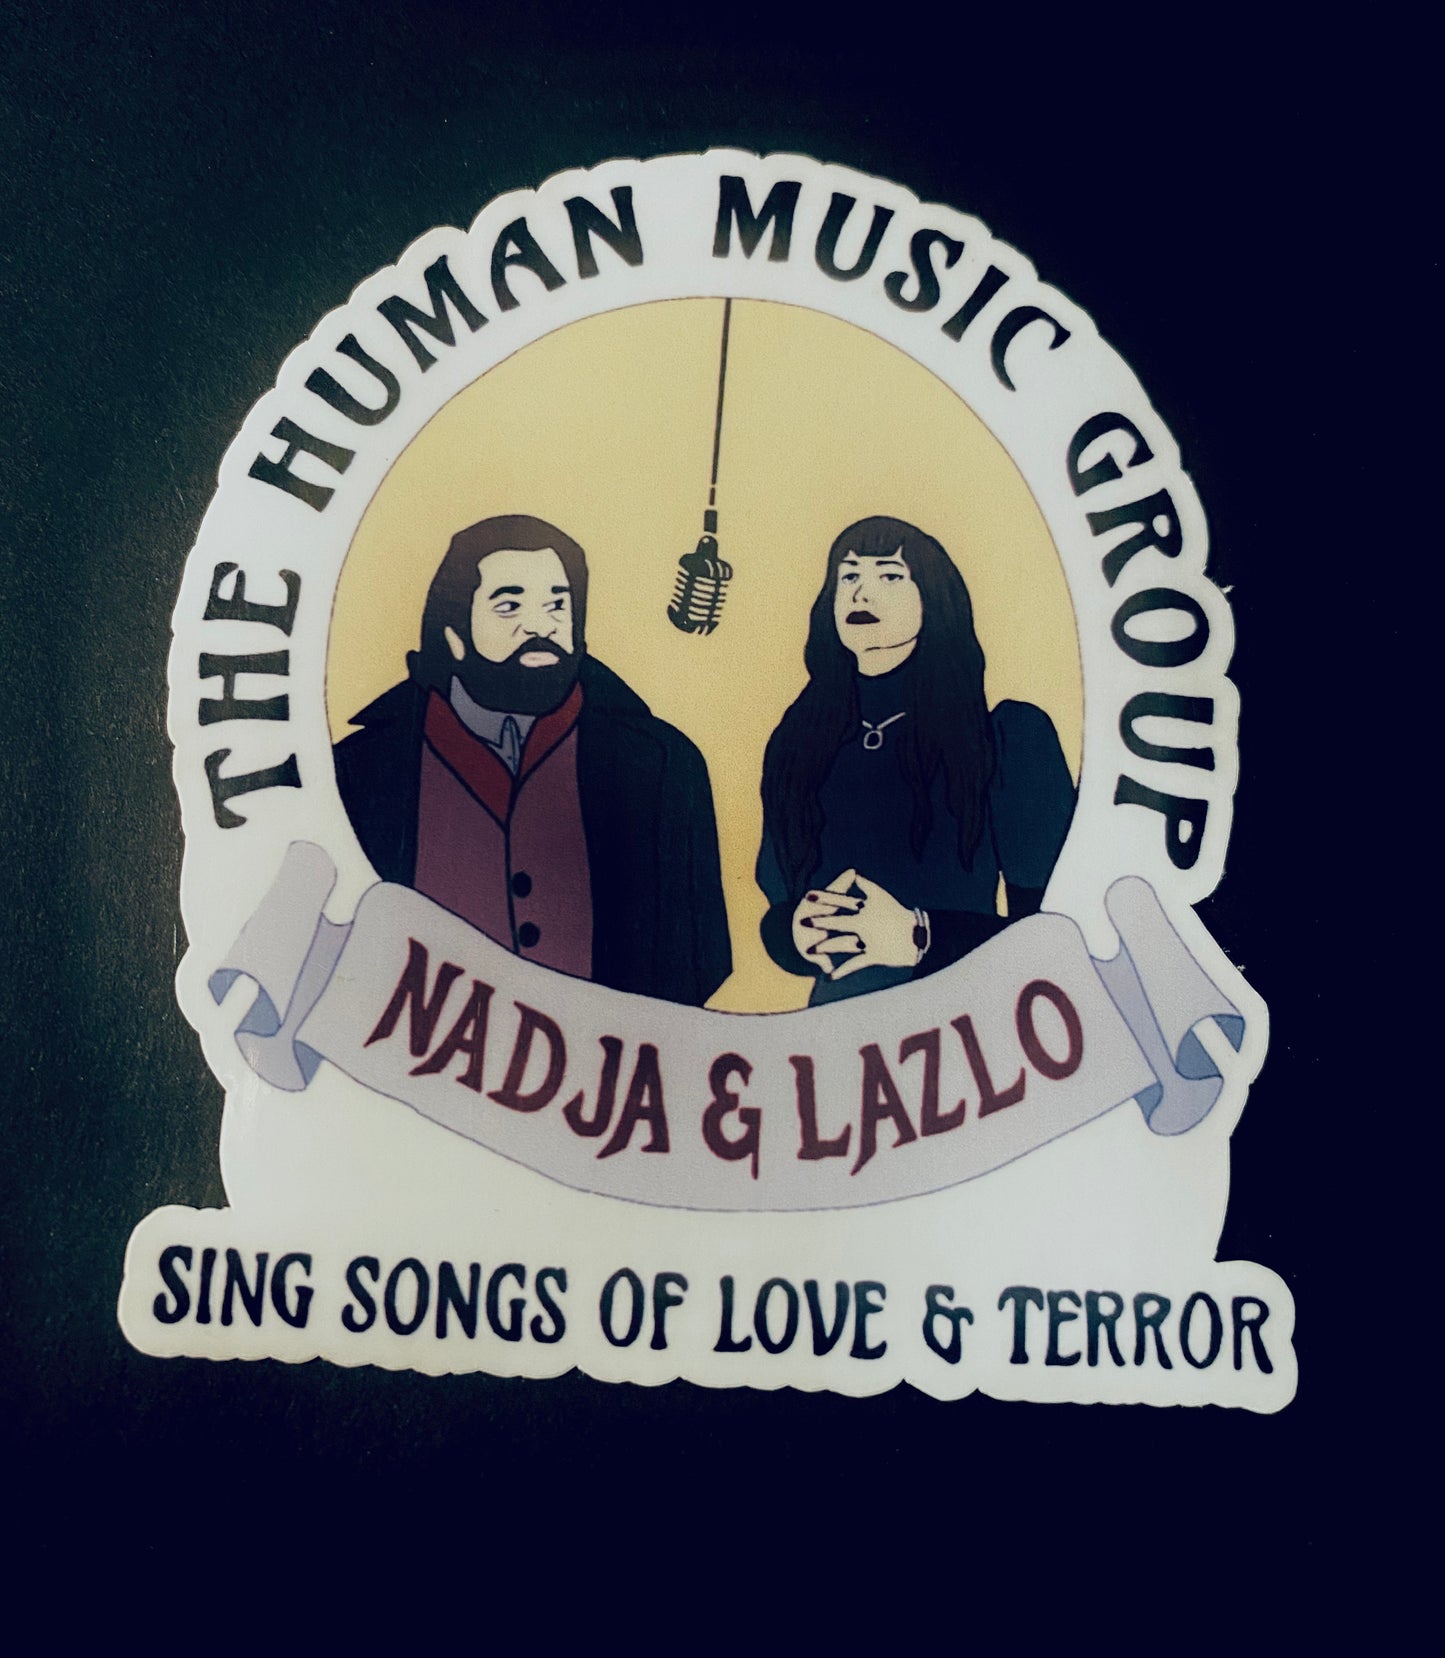 What We Do in the Shadows Music Sticker